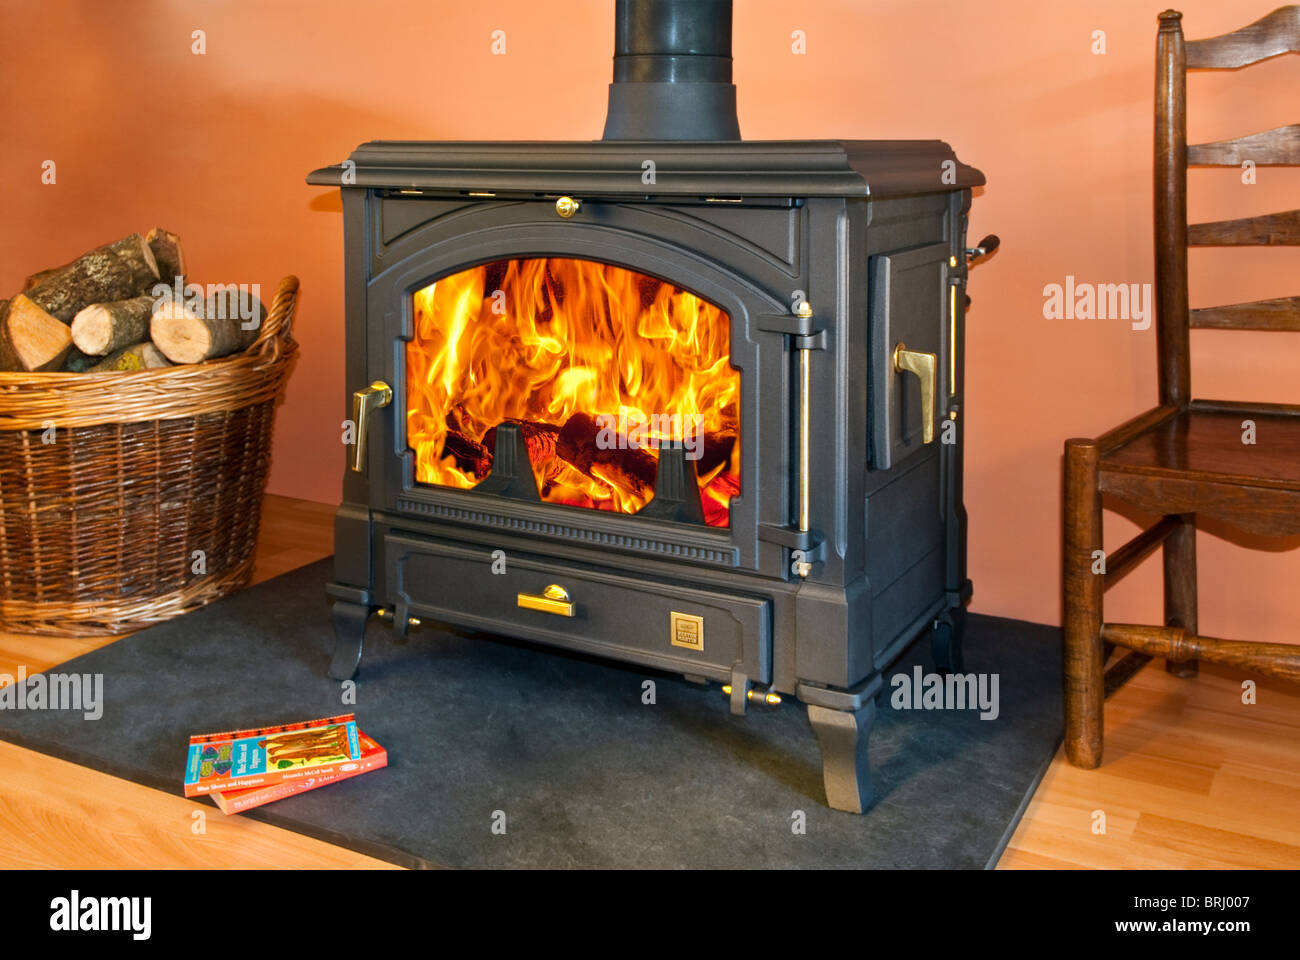 A Franco Belge wood burning stove with beautiful flames Stock Photo - Alamy